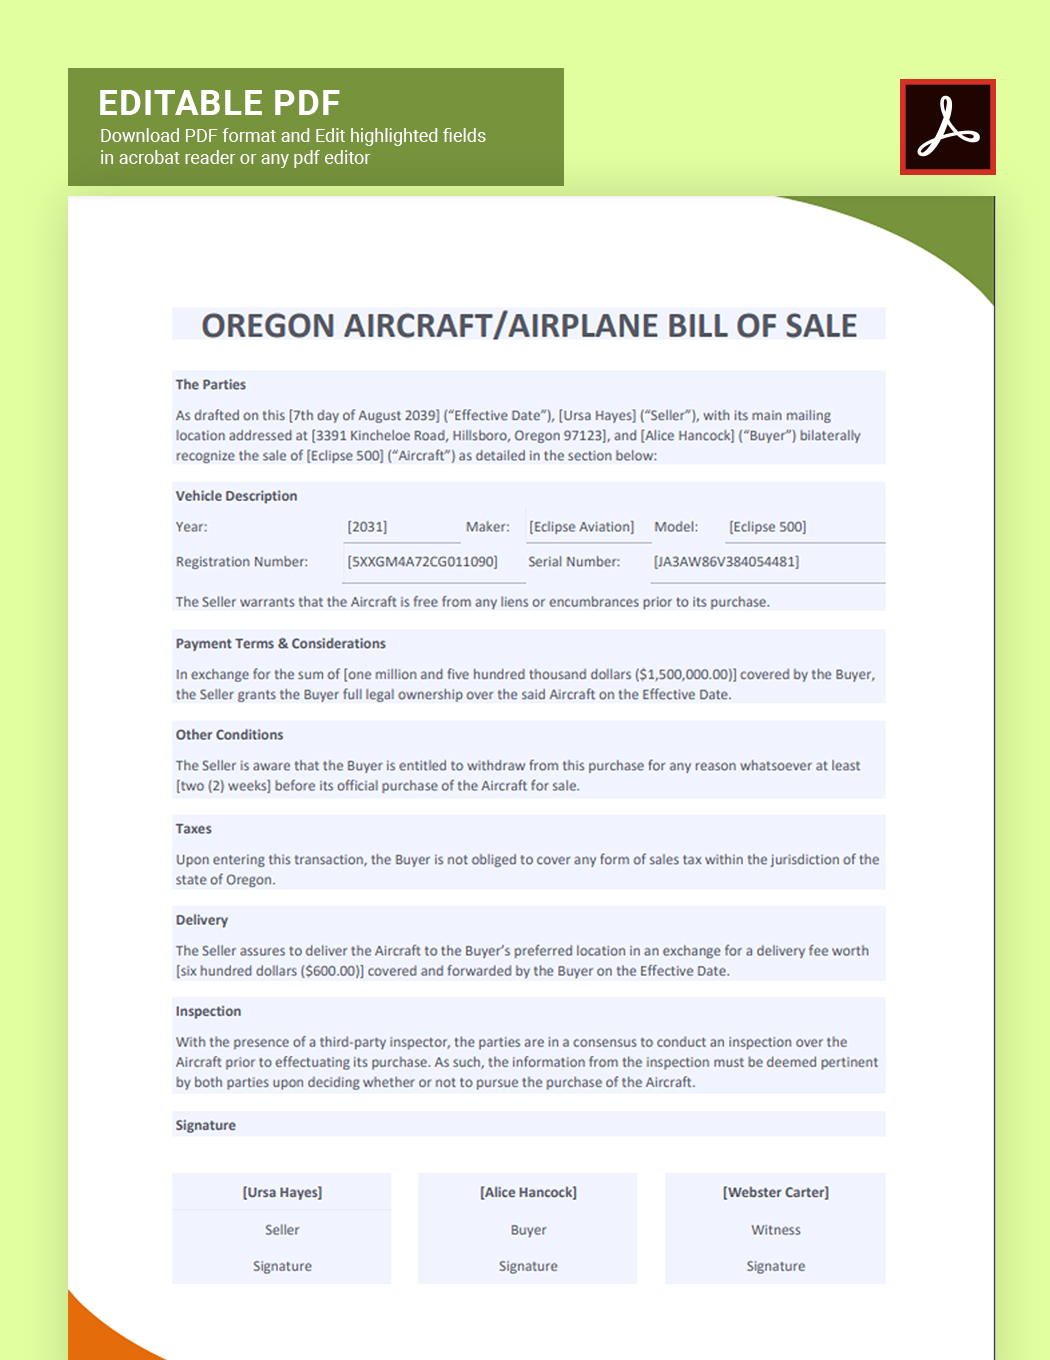 Oregon Aircraft/Airplane Bill of Sale Template